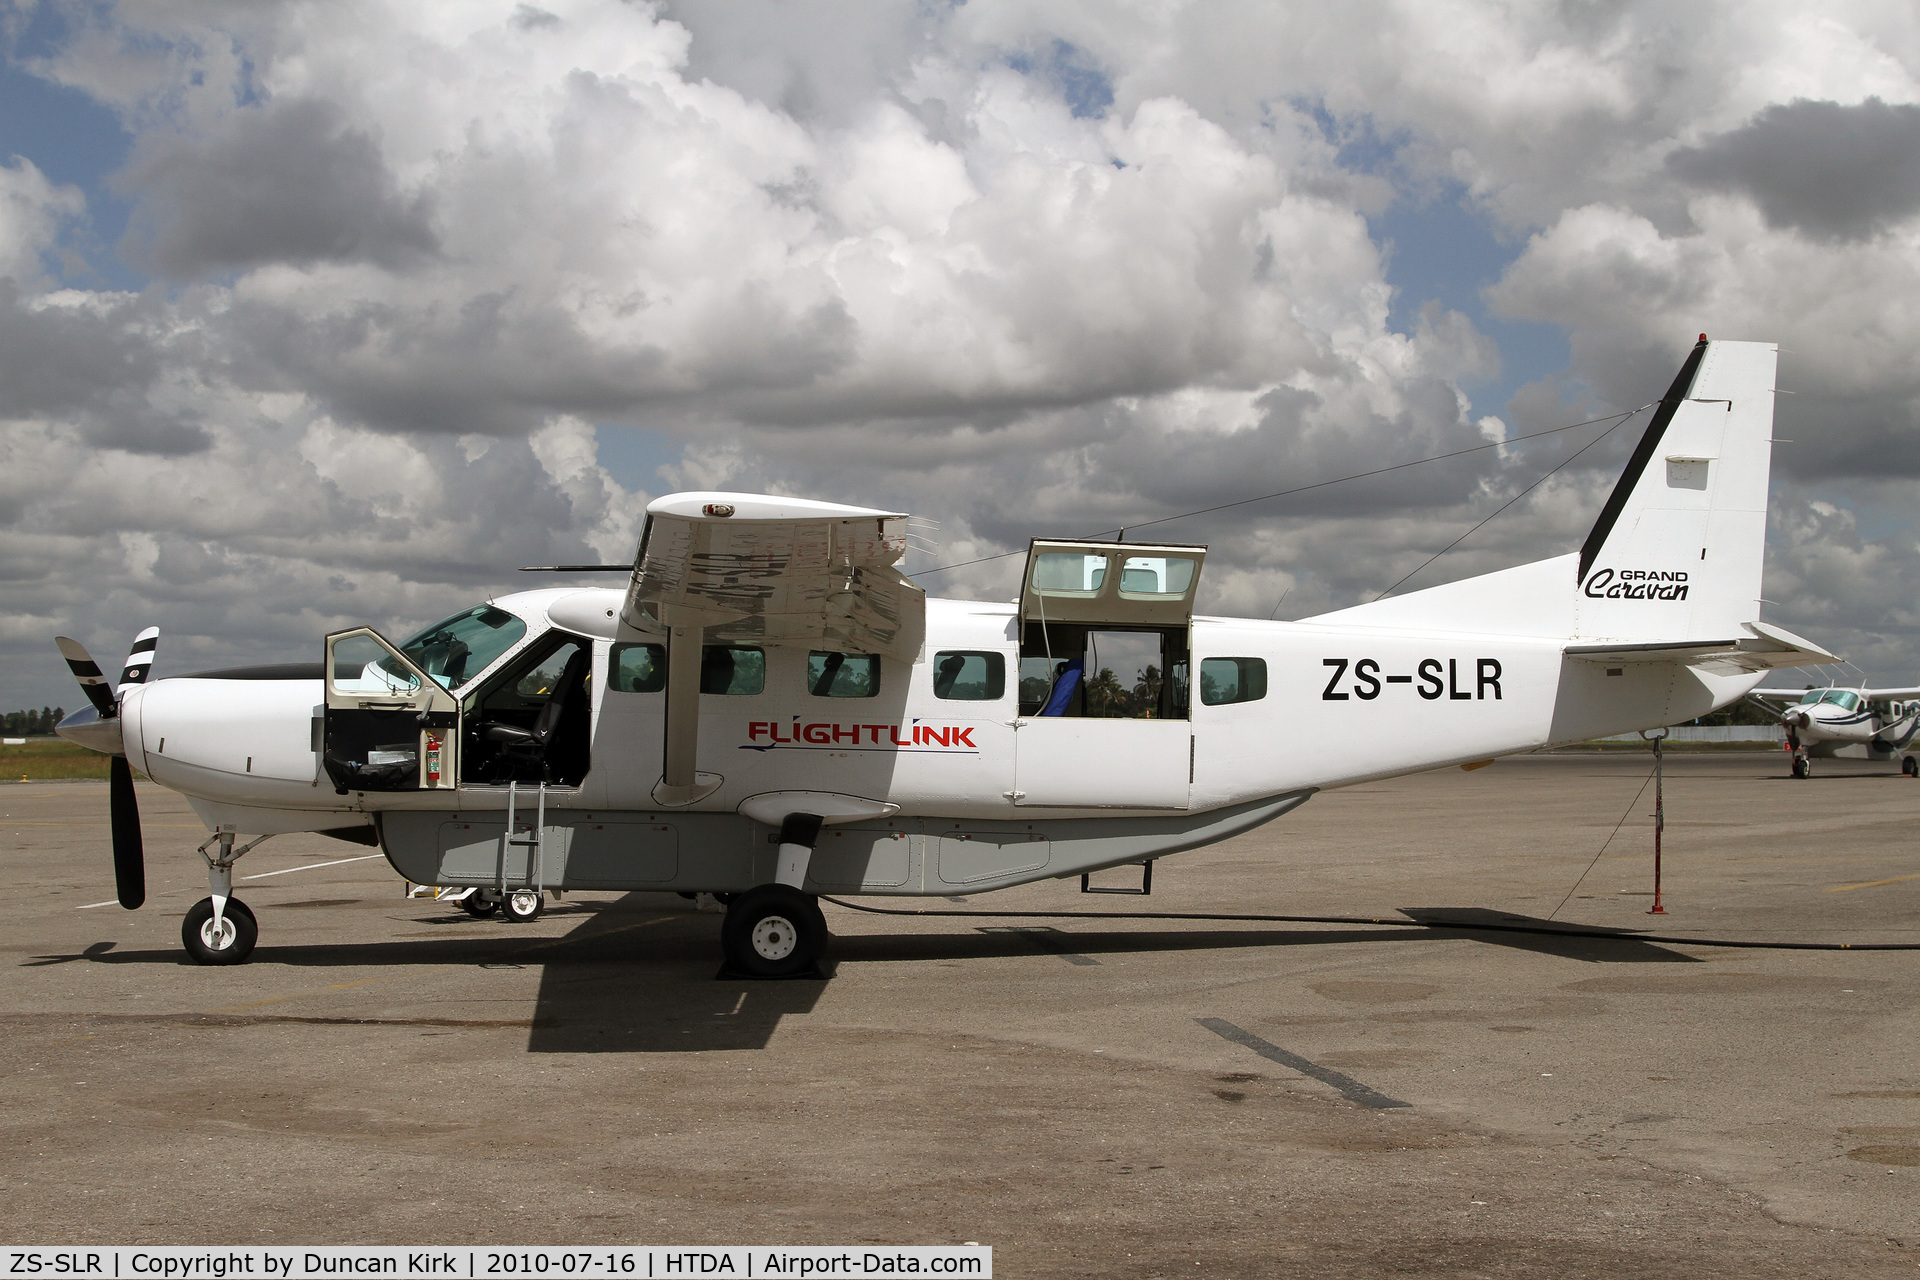 ZS-SLR, 1996 Cessna 208B Grand Caravan C/N 208B0497, Readying for another flight at the Dar Es Salaam commuter terminal